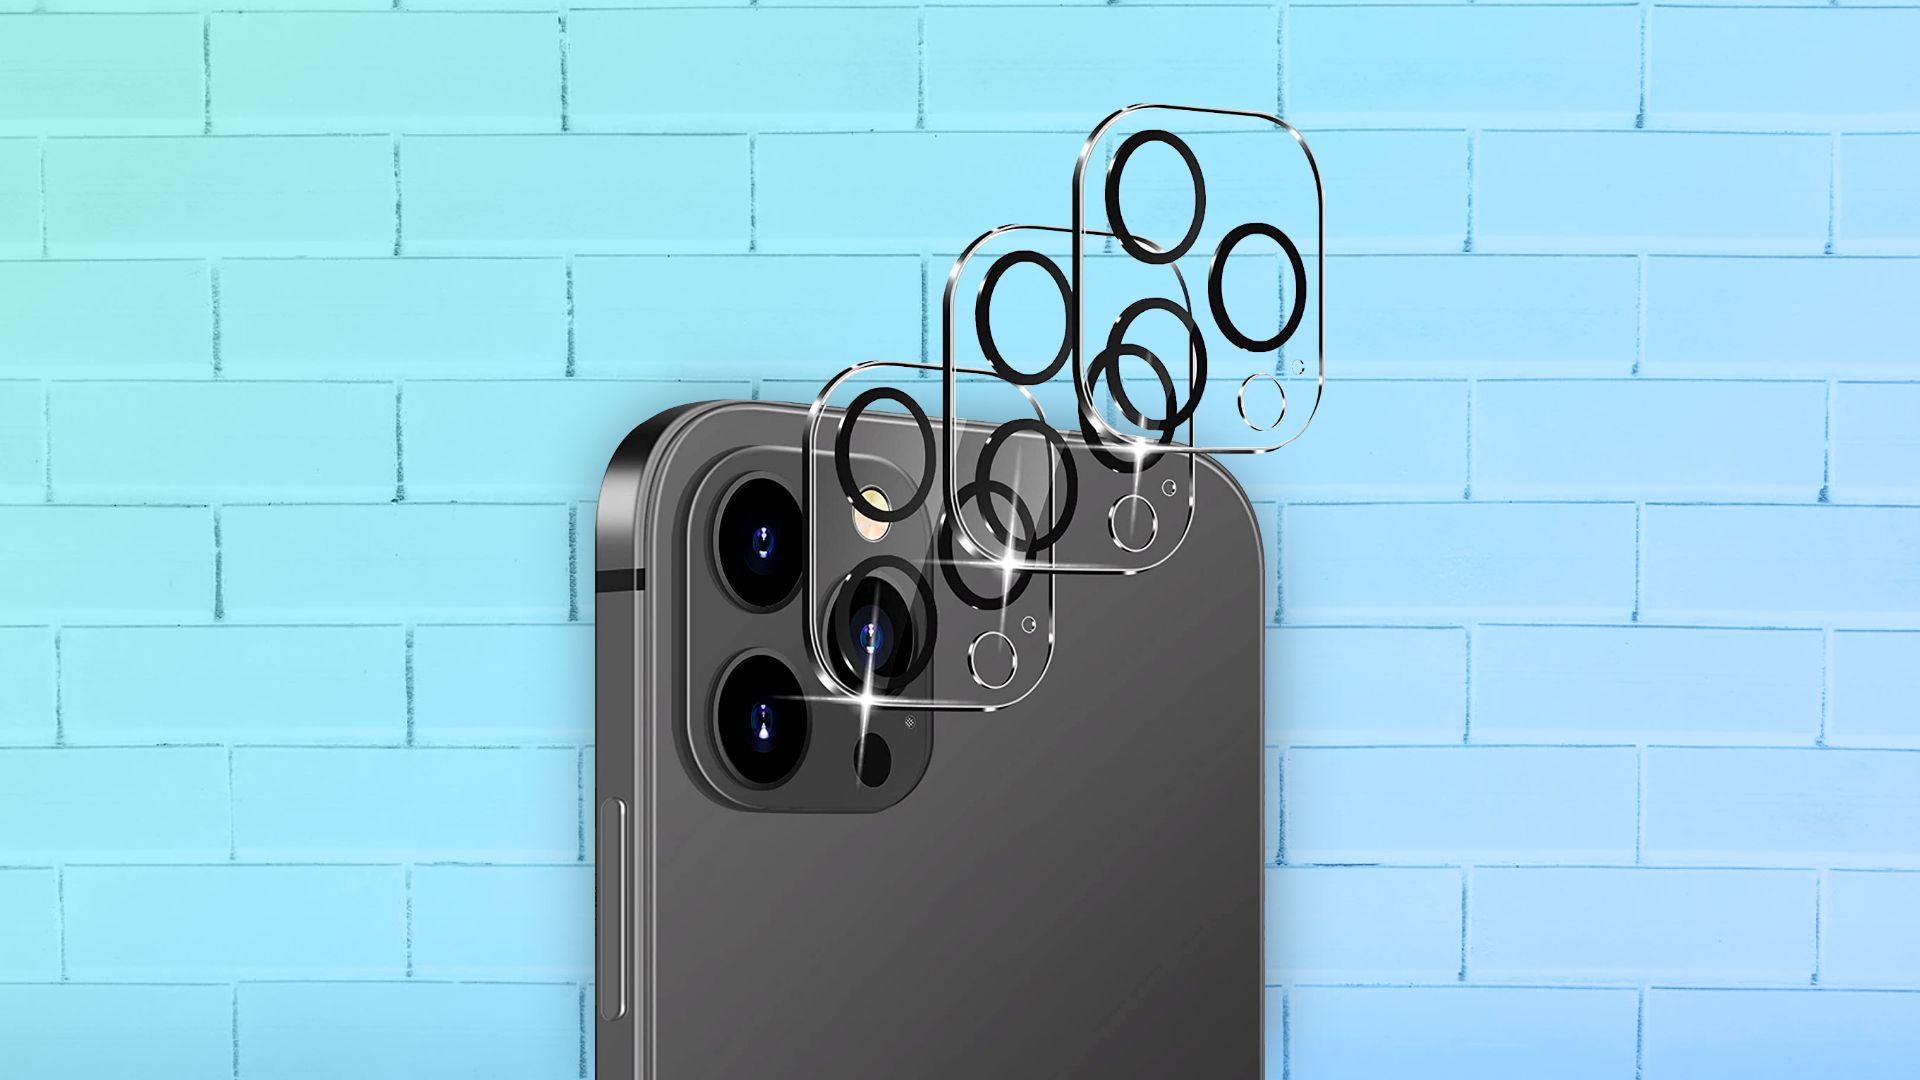 KINGWING camera lens protector for iPhone 13 Pro